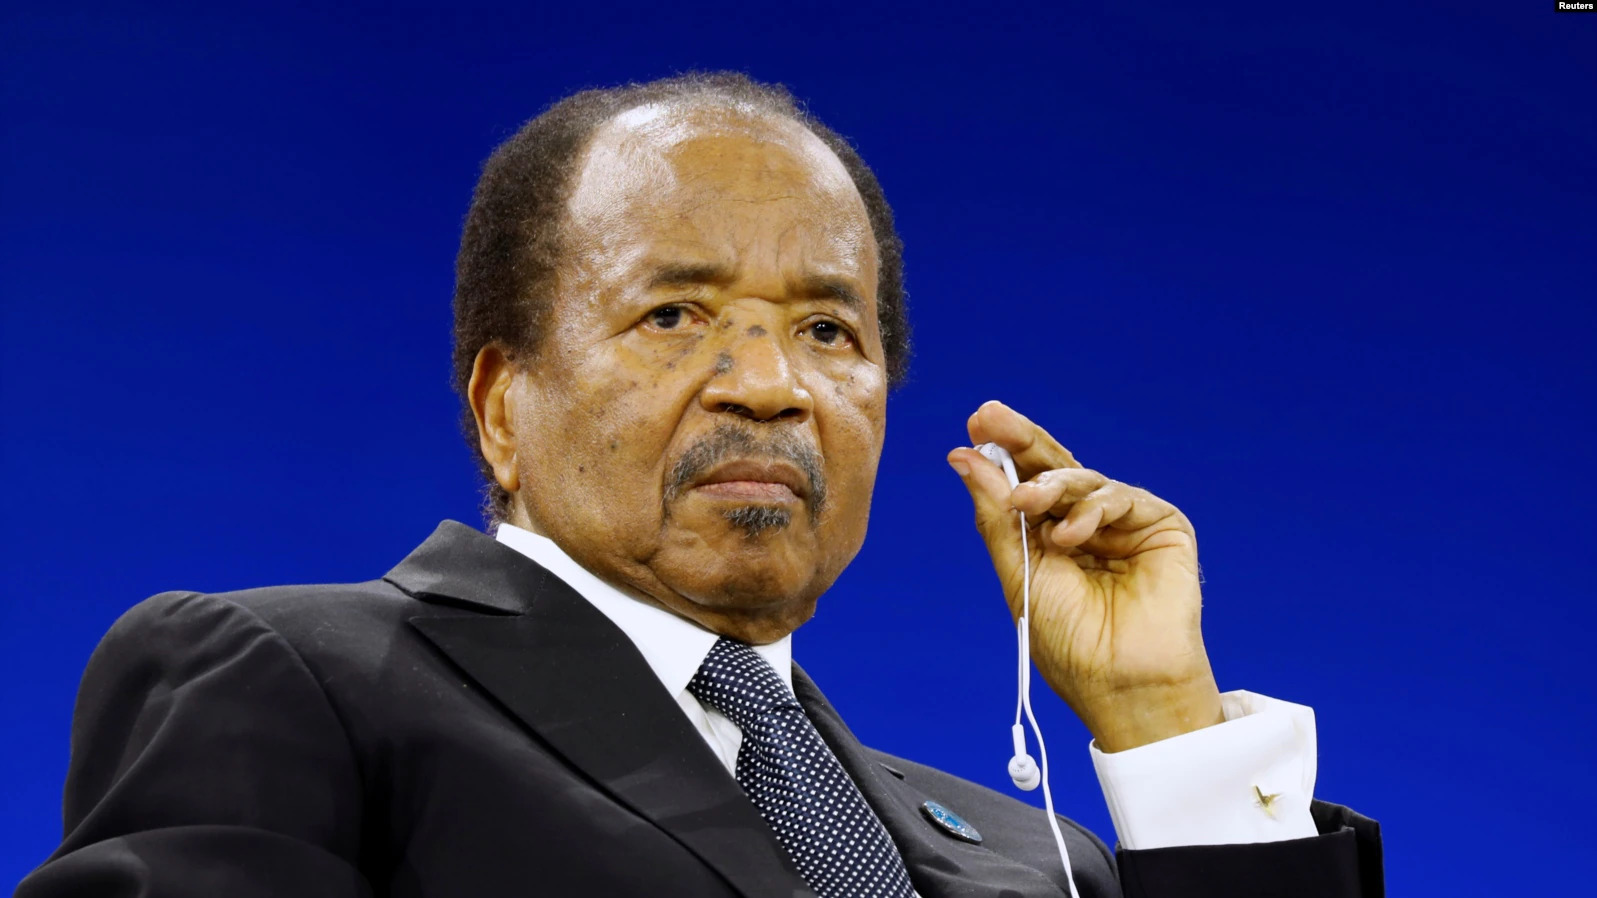 Cameroonian President Paul Biya, 88, has been in power since 1982 and is Africa's second-longest ruling president and its oldest head of state, as well as the longest-ruling non-royal leader in the world.